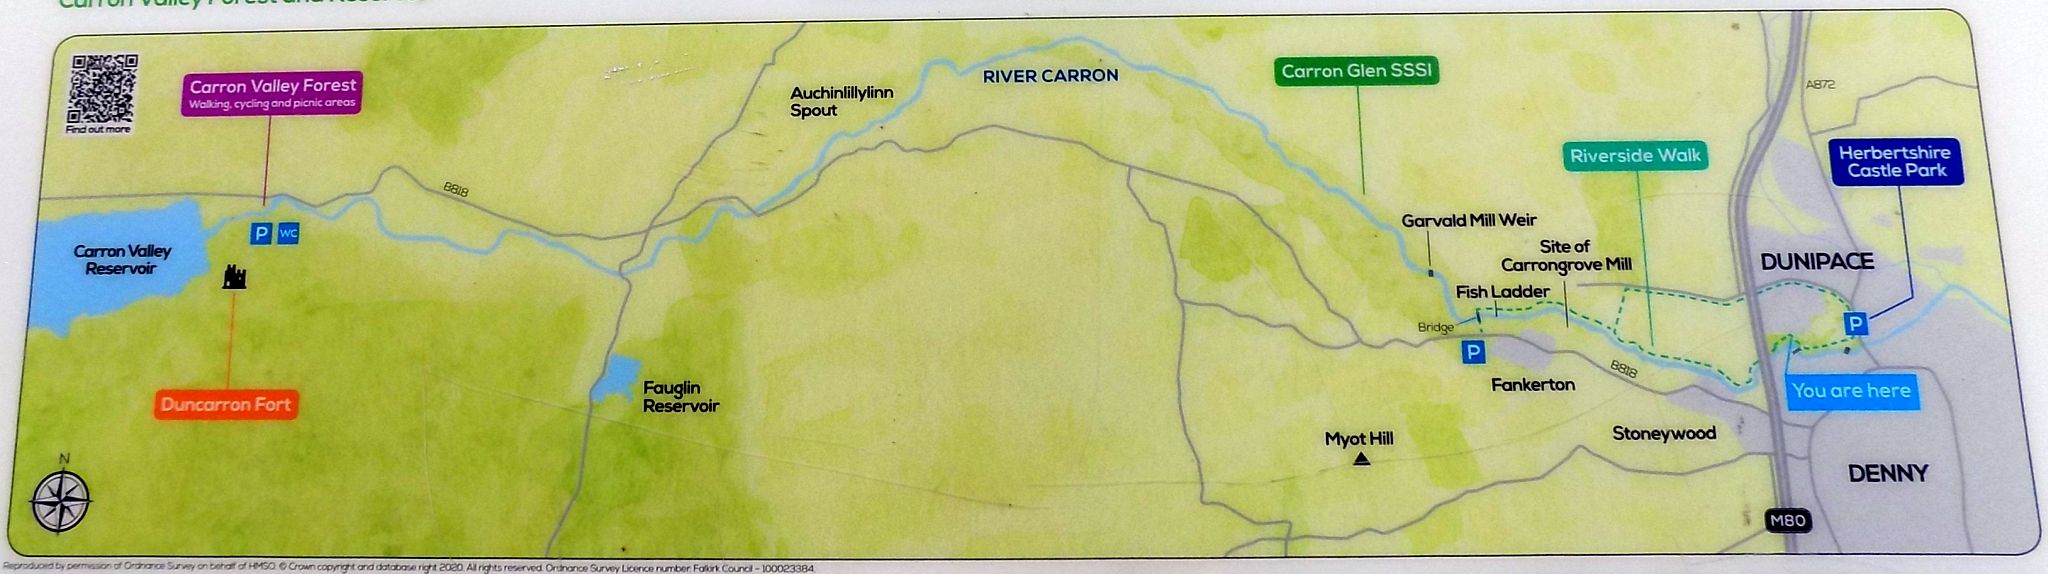 Map of Carron River Valley